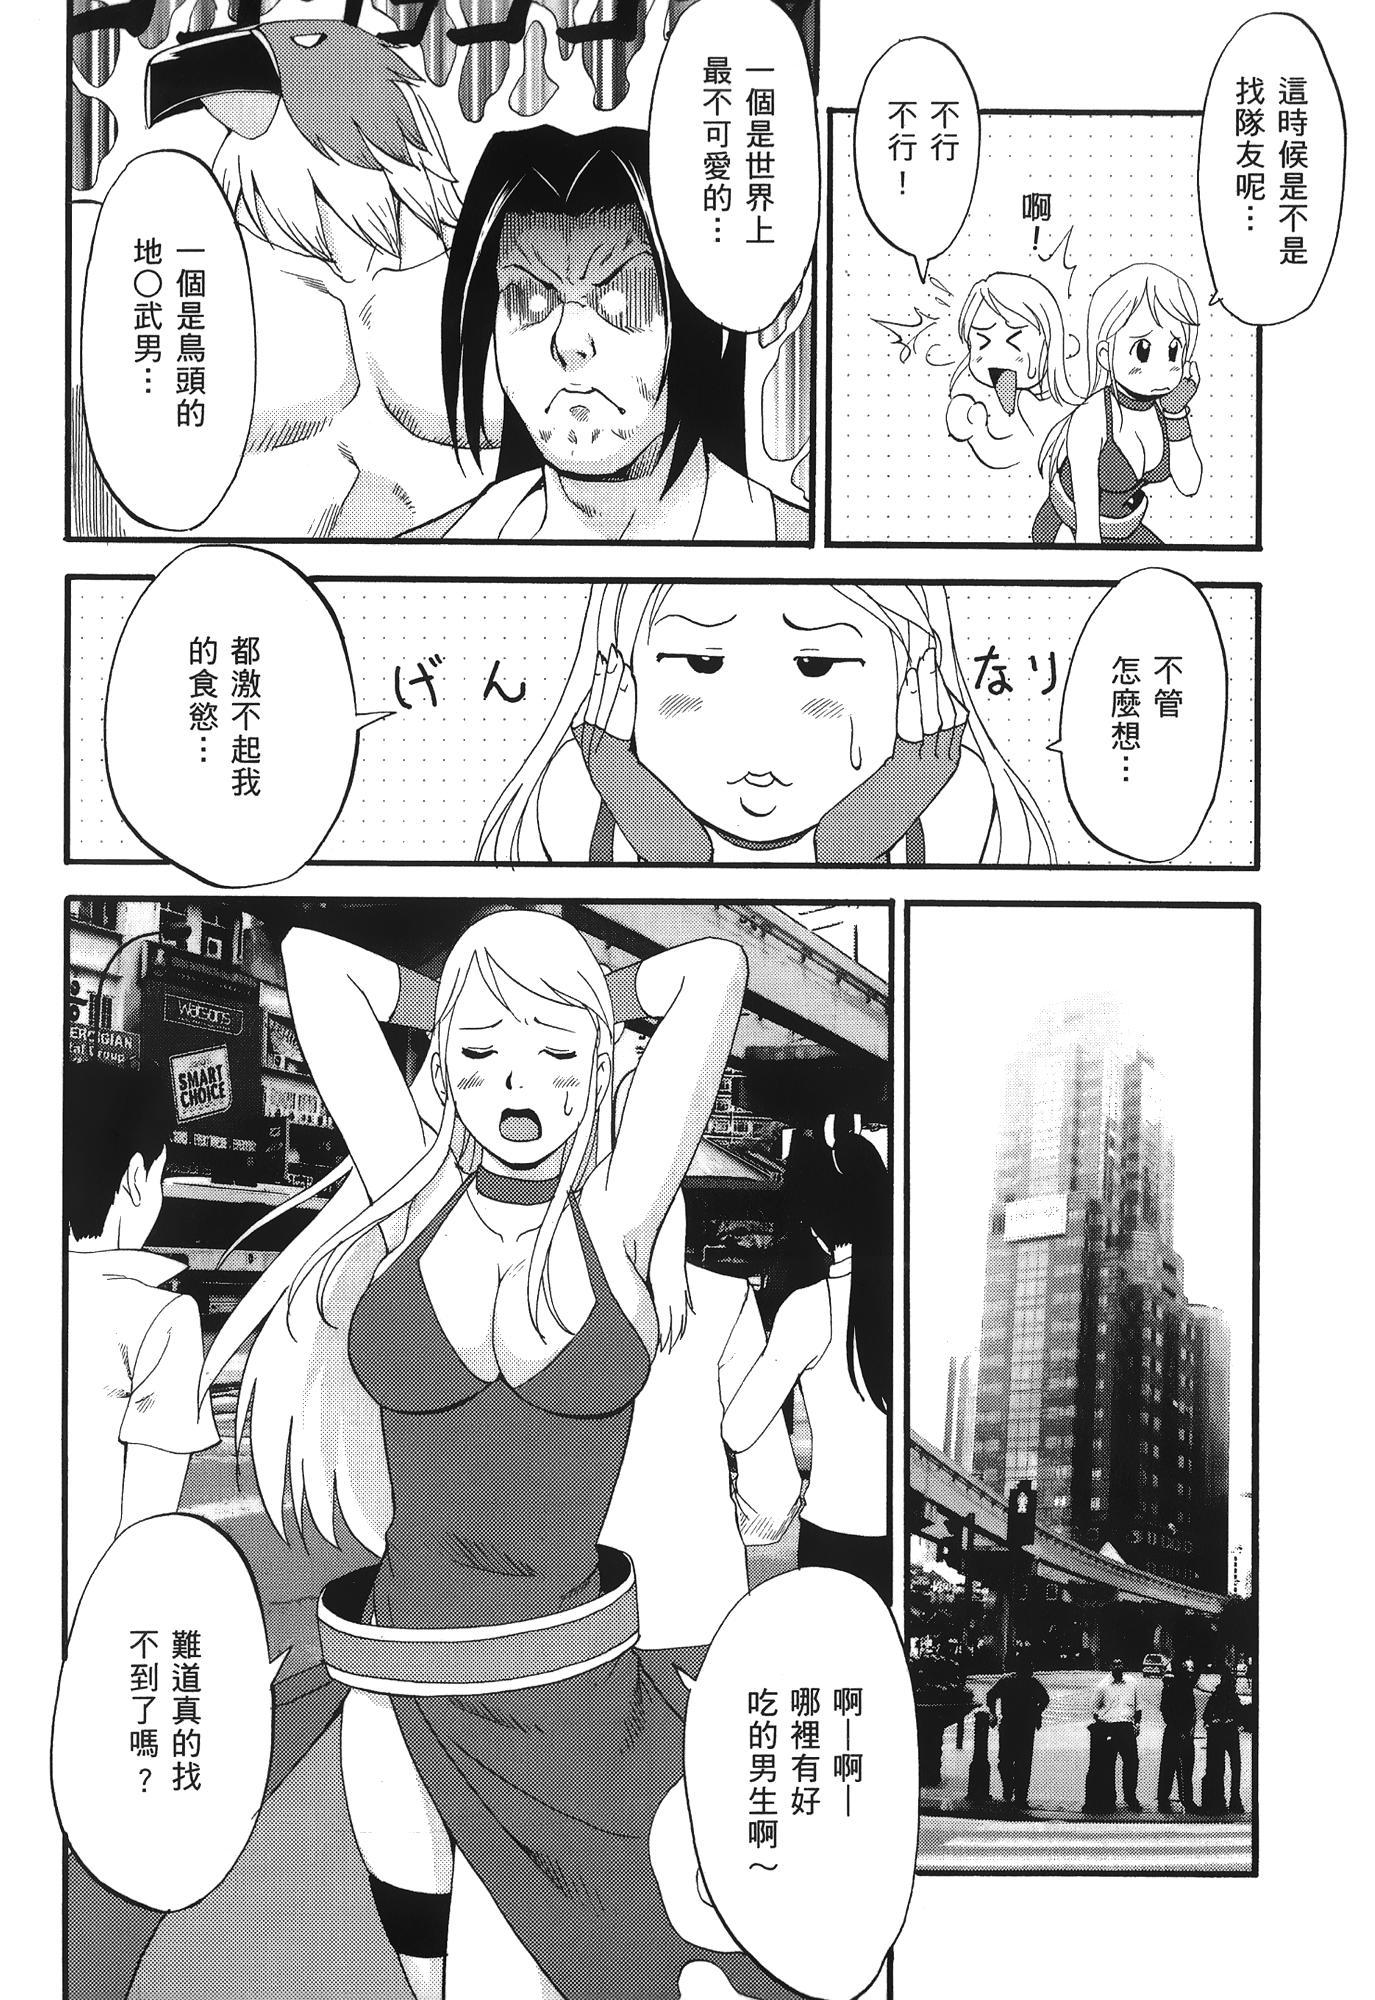 Couples Fucking [Saigado] THE YURI & FRIENDS 6 (King of Fighters) | 武鬥美少女 [Chinese] - King of fighters Gay Solo - Page 3